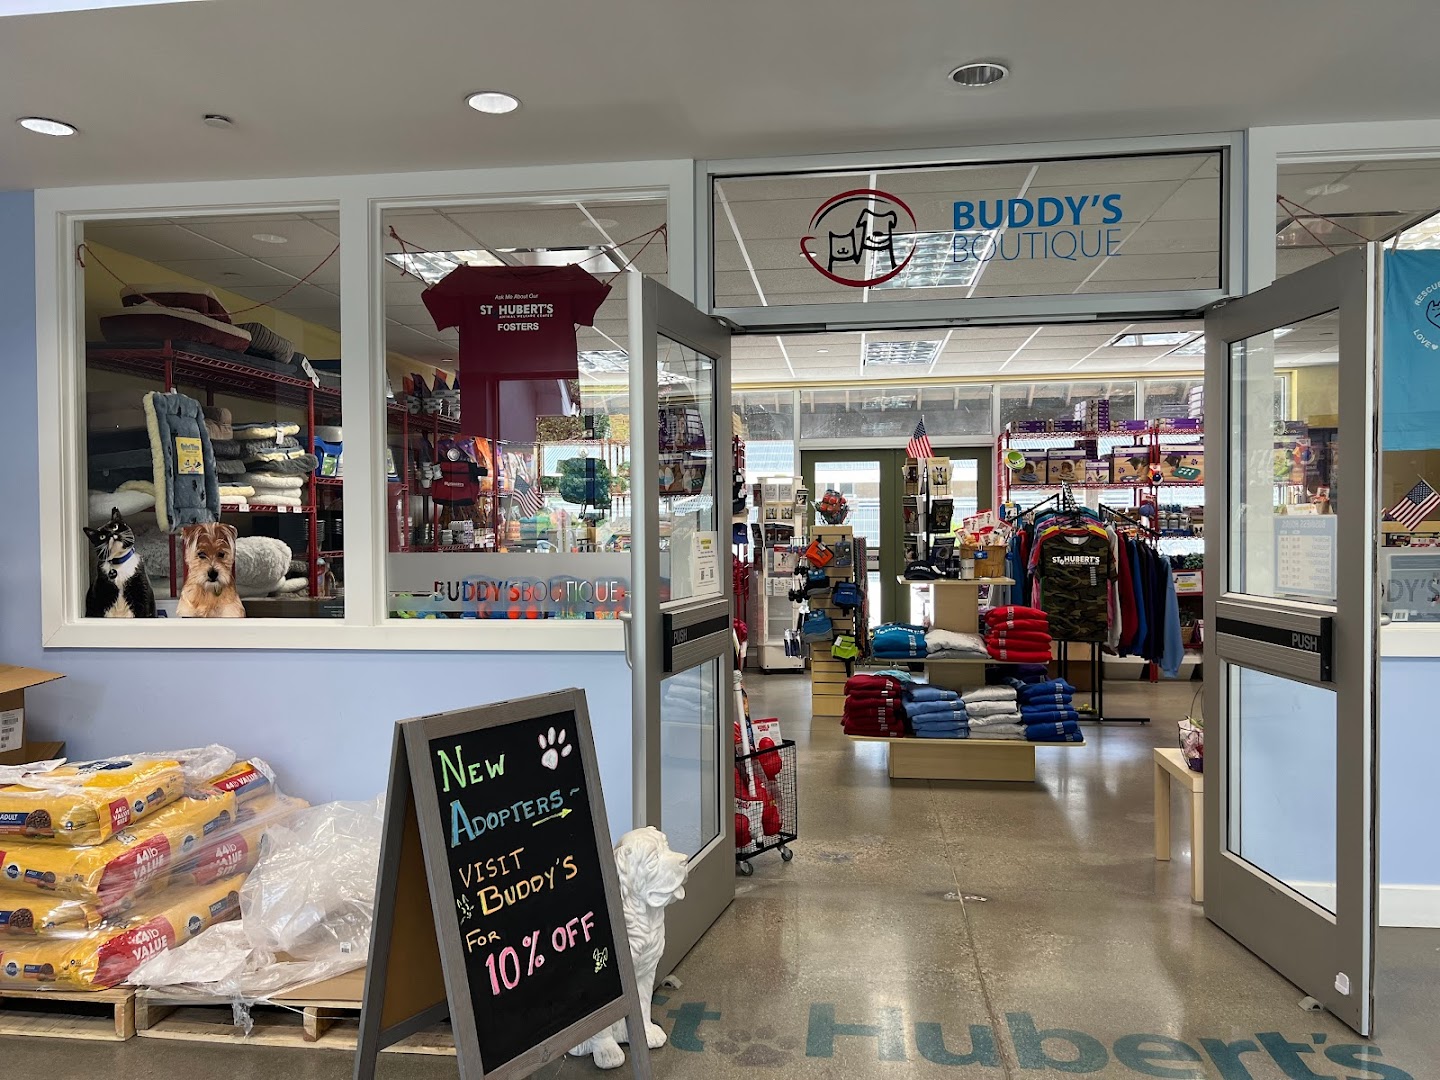 Buddy's Boutique